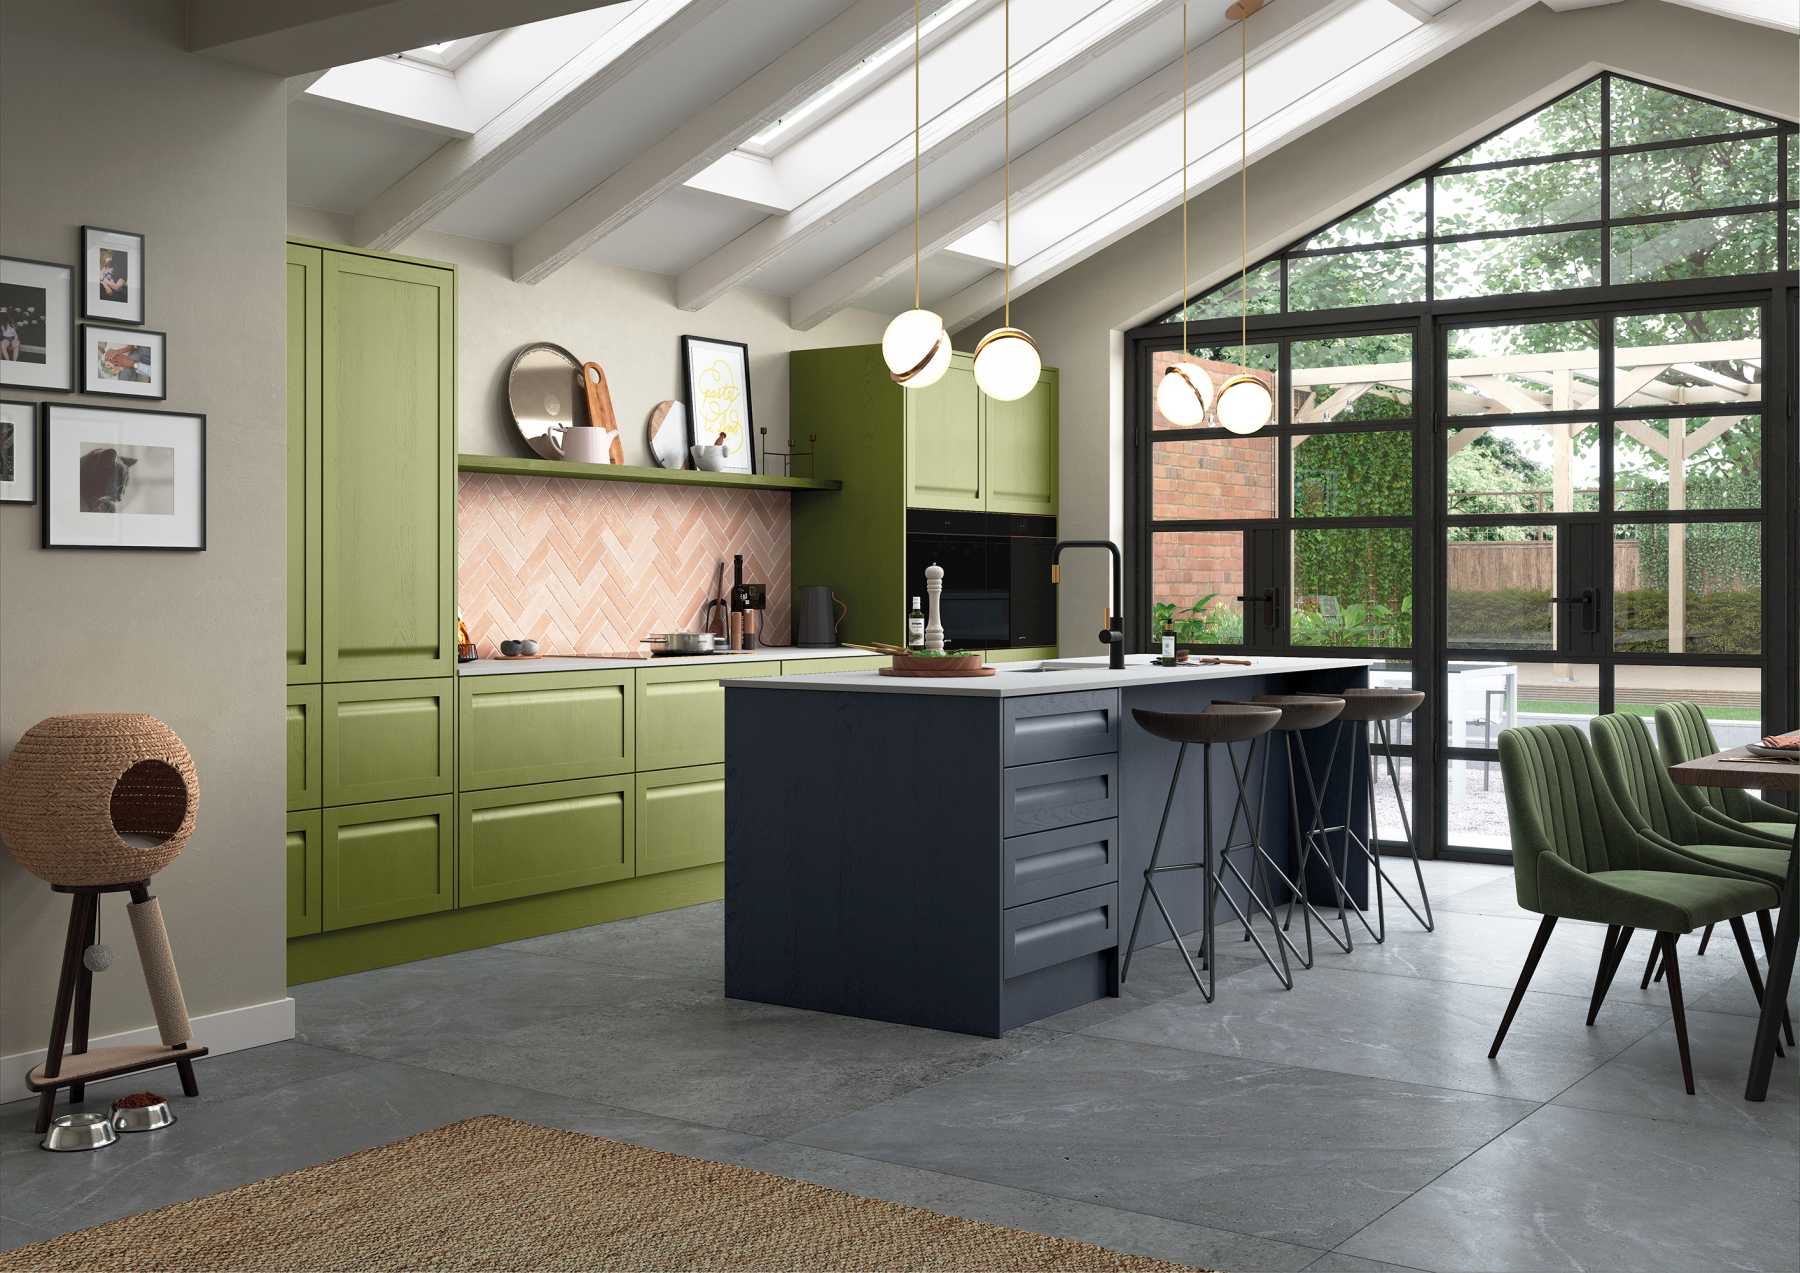 Handleless Shaker-Style Kitchen Painted Slate Blue and Citrus Green featuring island unit with pendant lighting, bare brick backsplash and dining area 